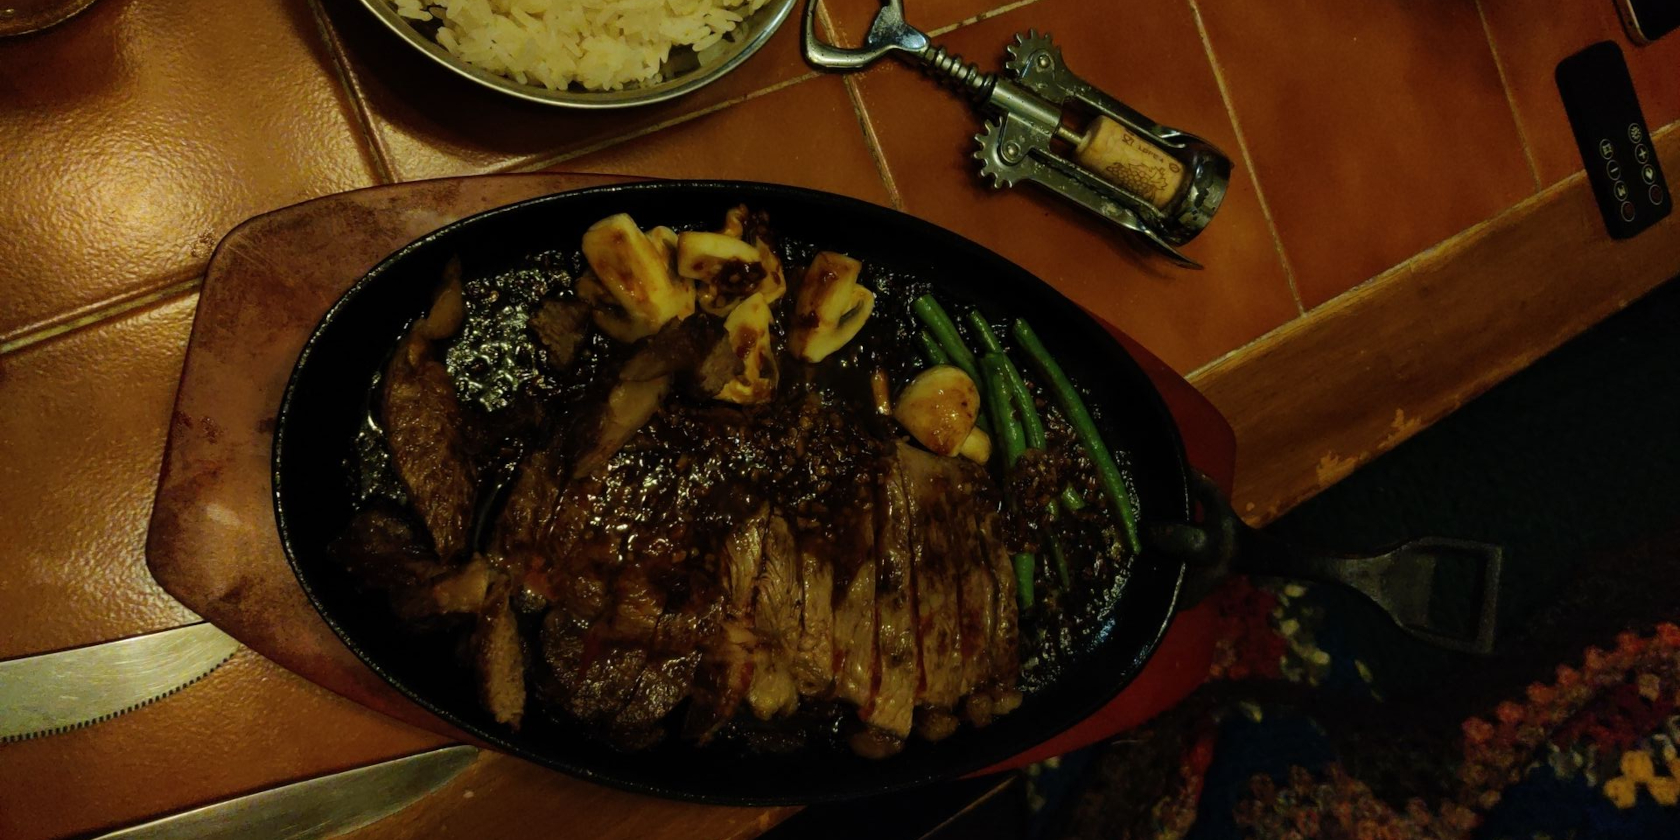 A delicious meal served on a cast iron skillet